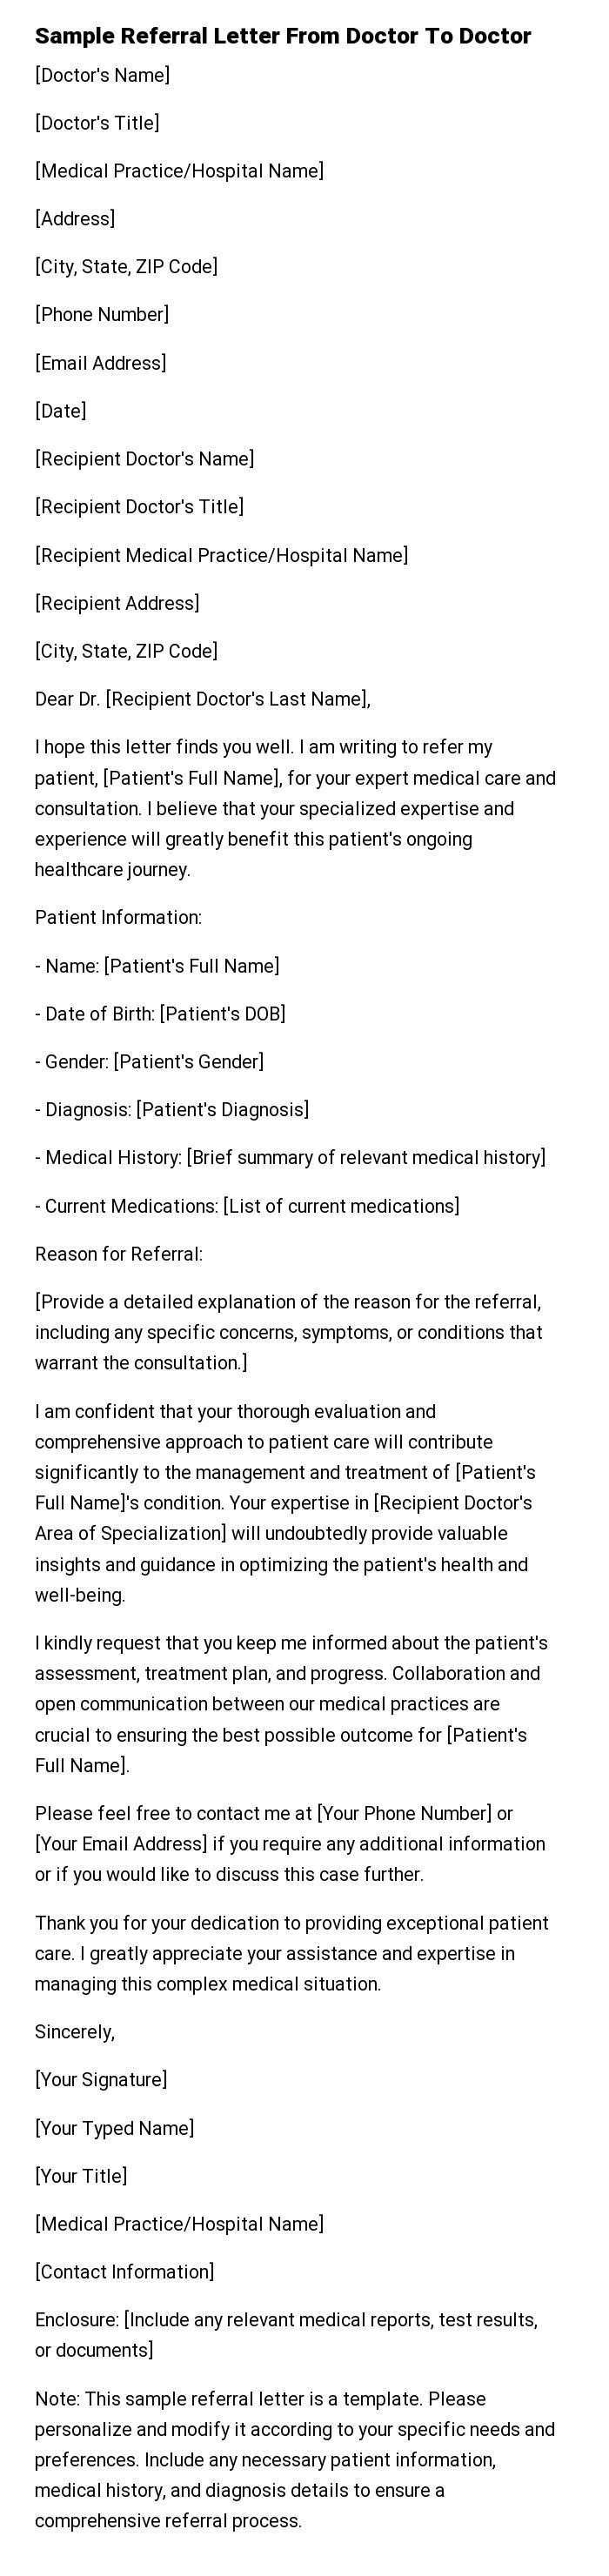 Sample Referral Letter From Doctor To Doctor